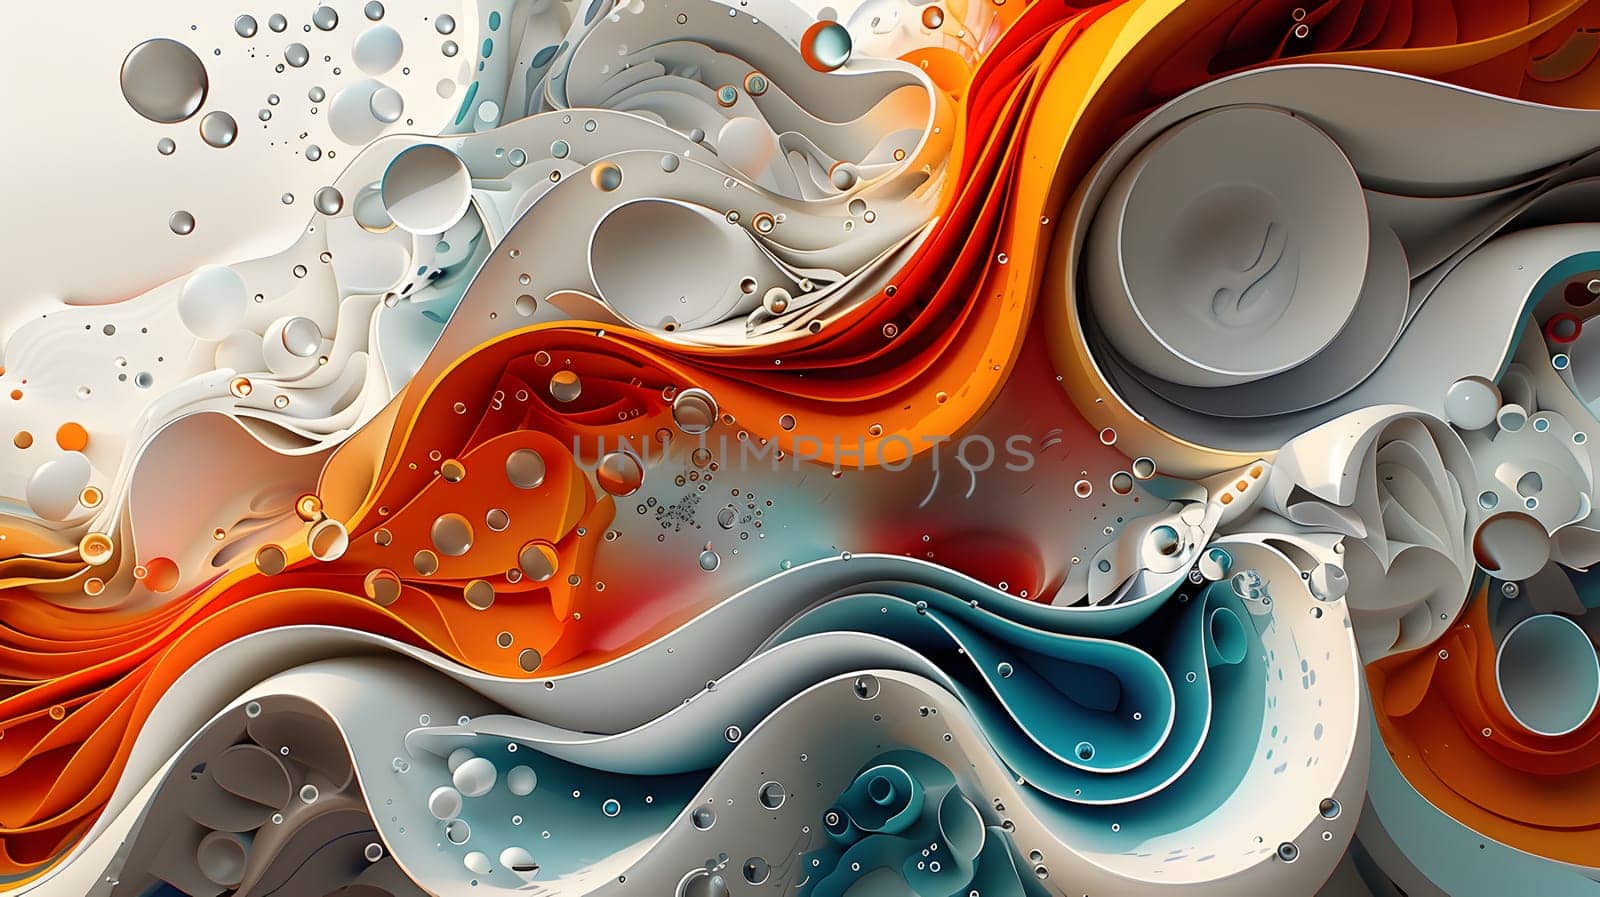 An artistic representation of a fluid organism in electric blue hues, resembling a colorful swirl of liquid. The pattern created mimics natural landscapes with a touch of automotive lighting